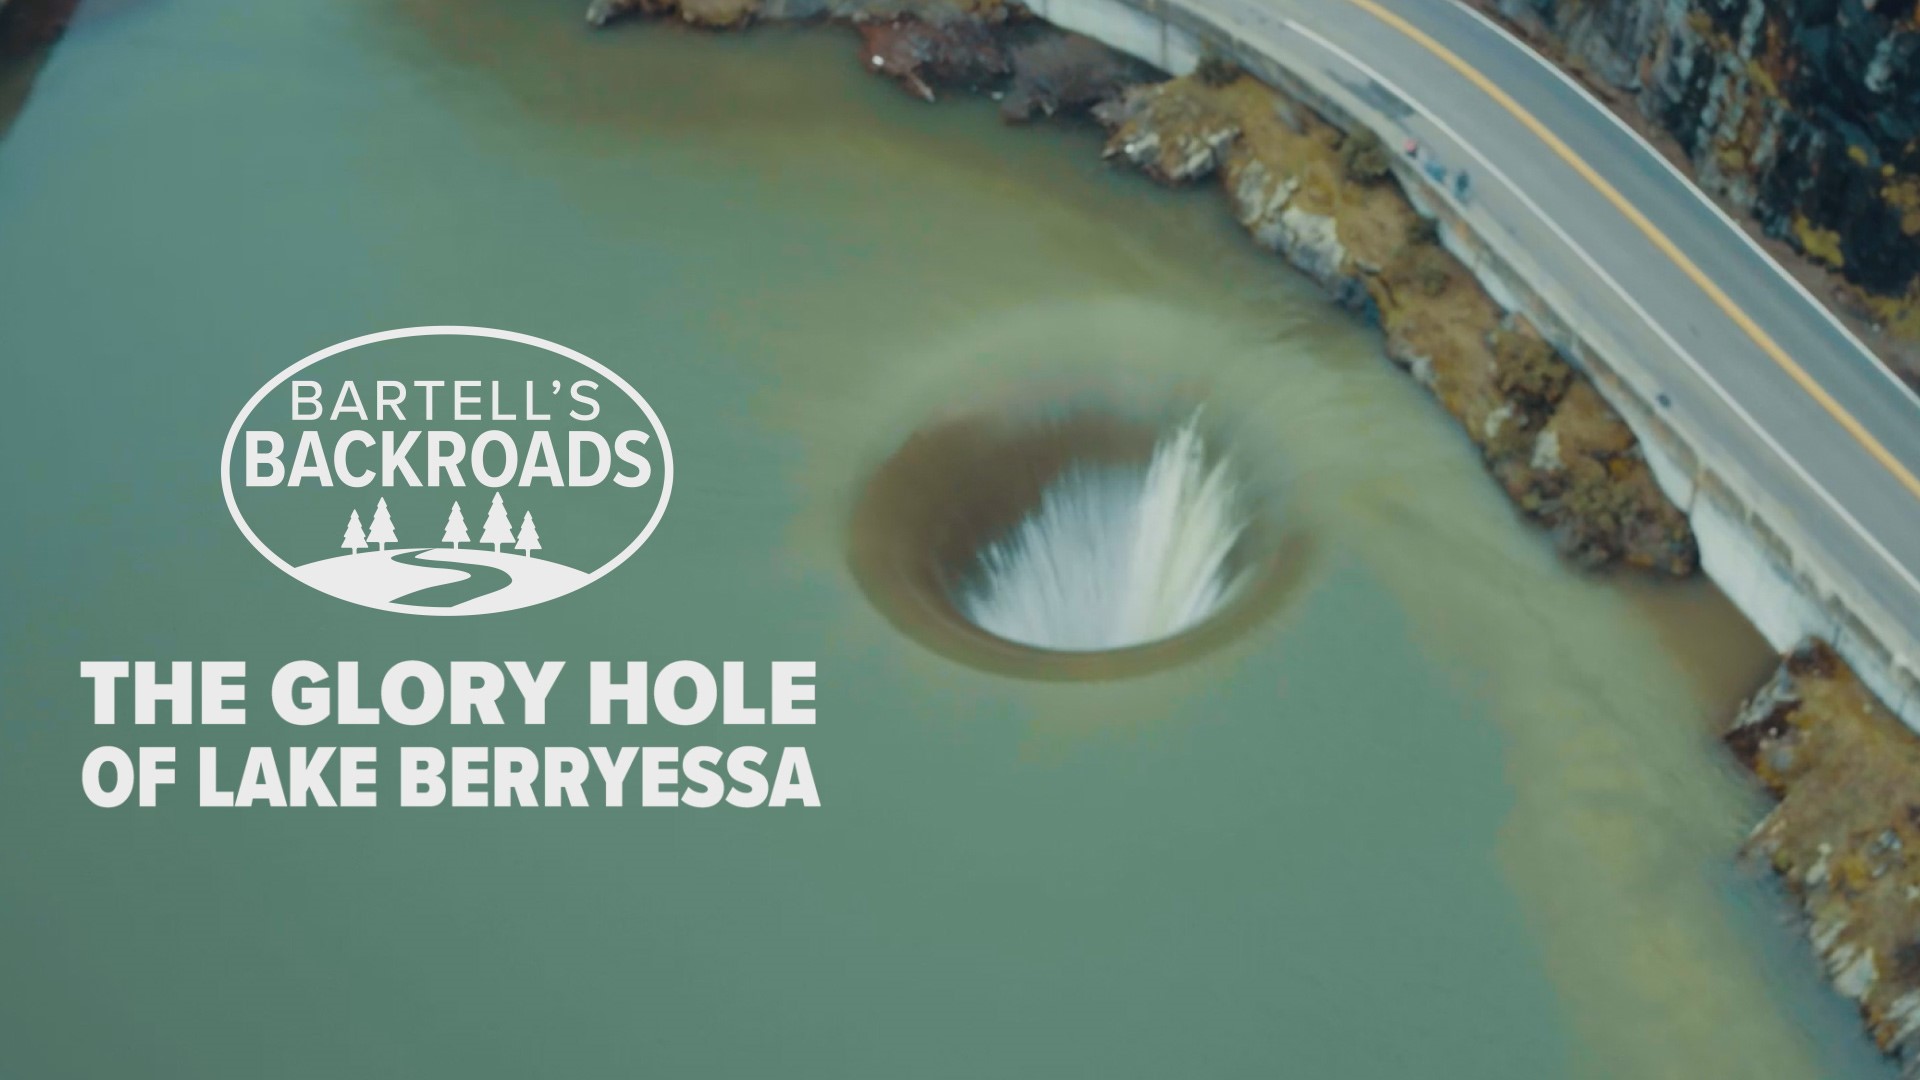 When the water gets too high for the Monticello Dam at Lake Berryessa, there's a simple solution: open the Morning Glory Spillway. Hit the backroads with John Bartell for a closer look at the gigantic drain that never needs to be unclogged.